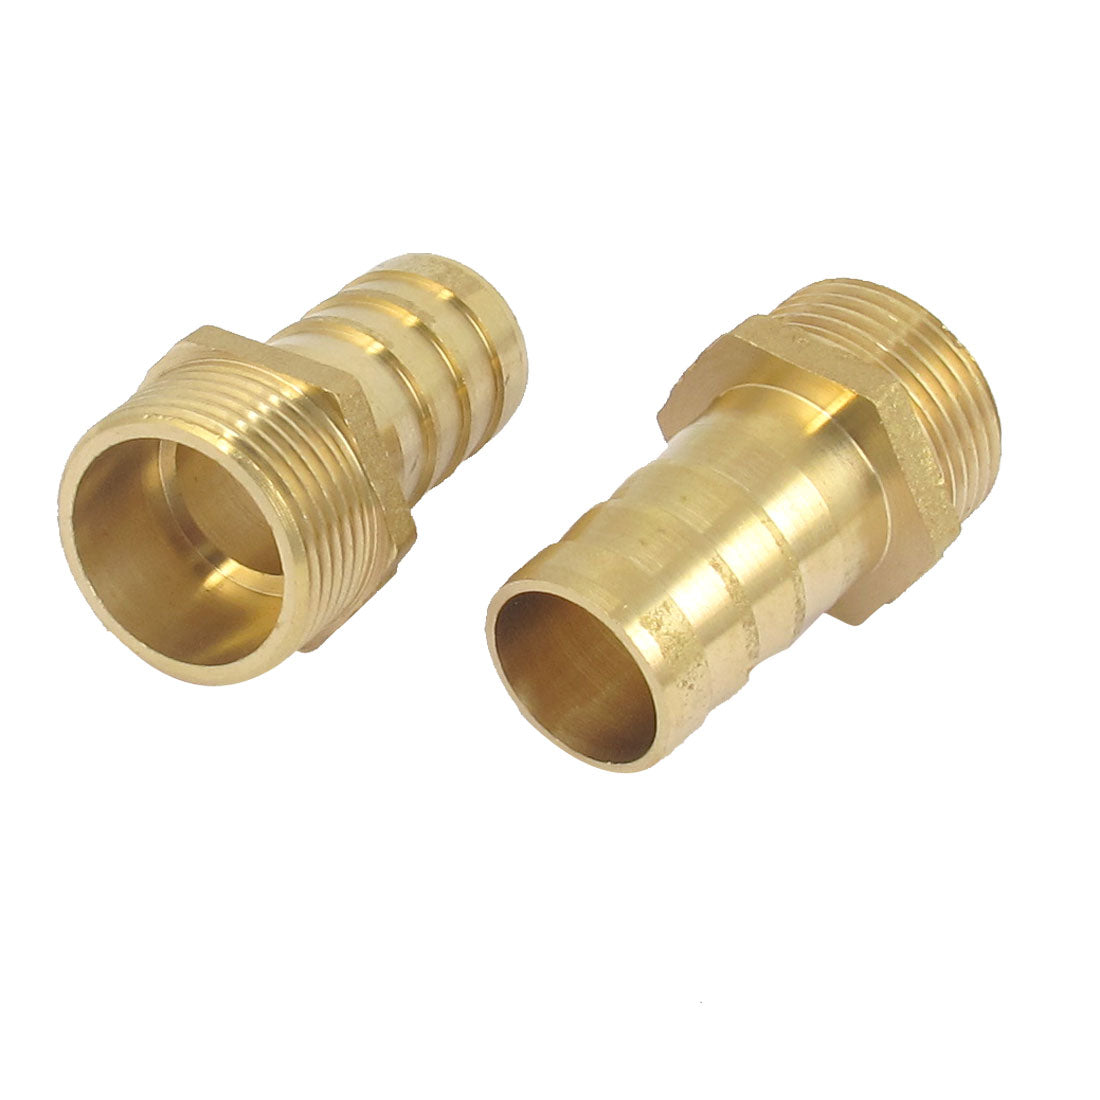 uxcell Uxcell Brass 3/4BSP Male Thread to 19mm Hose Barb Straight Fitting Adapter accoupler 2PCS